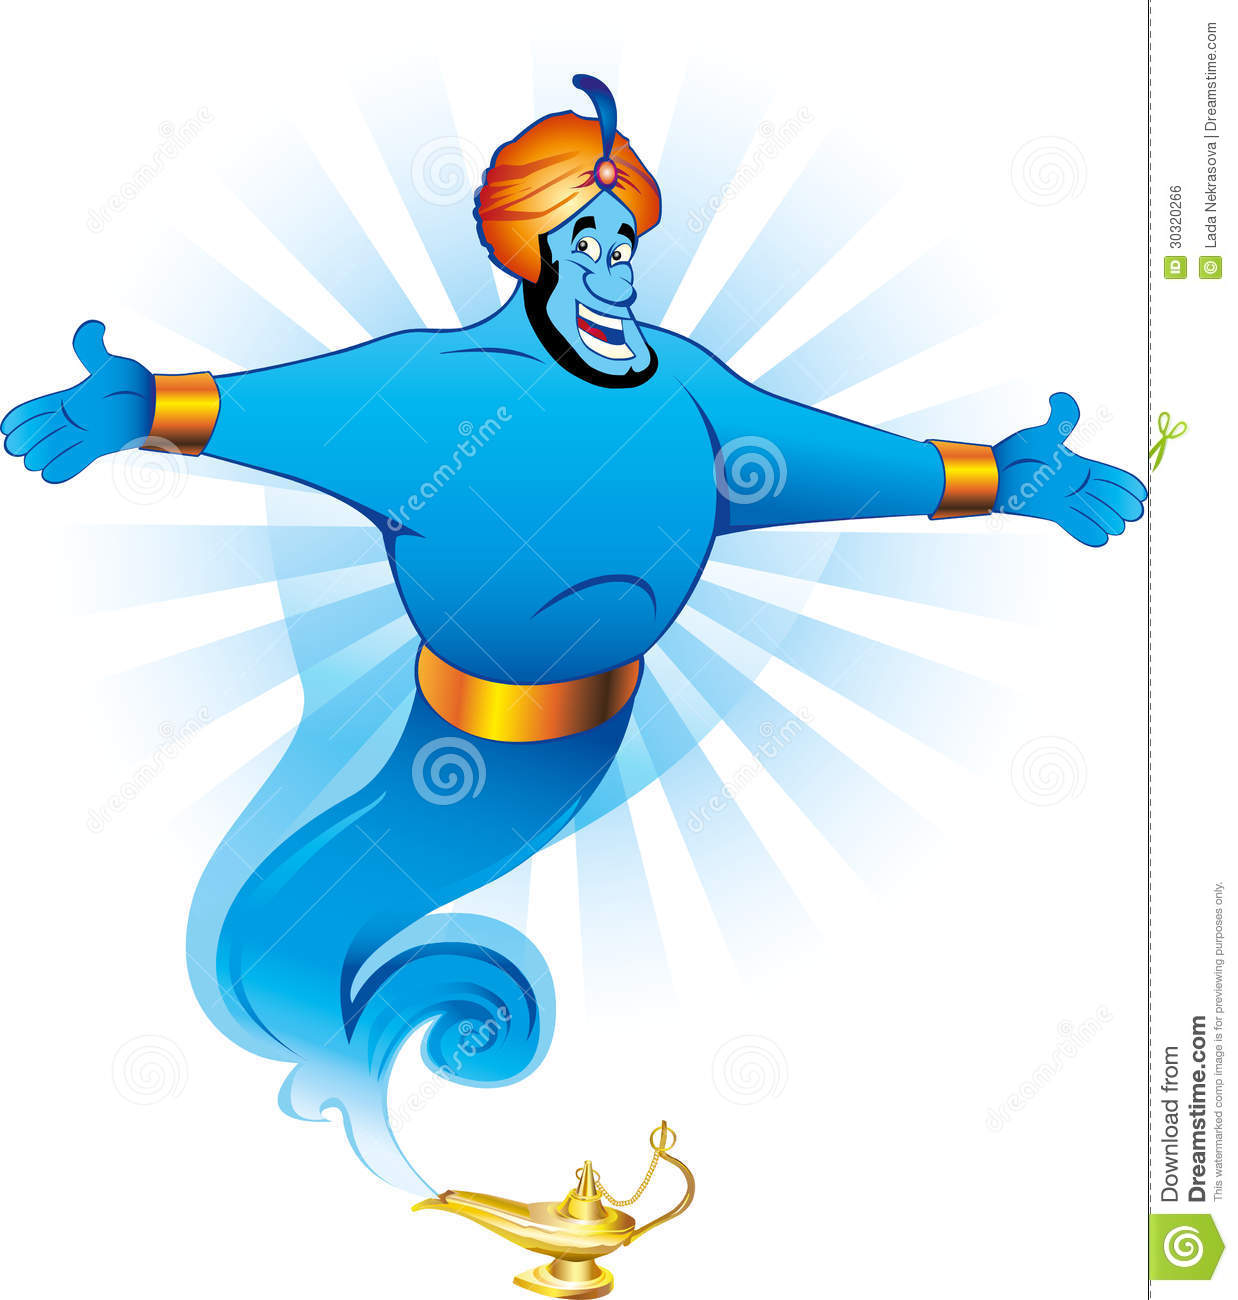 Illustration Of Magic Genie Appear From Magic Lamp